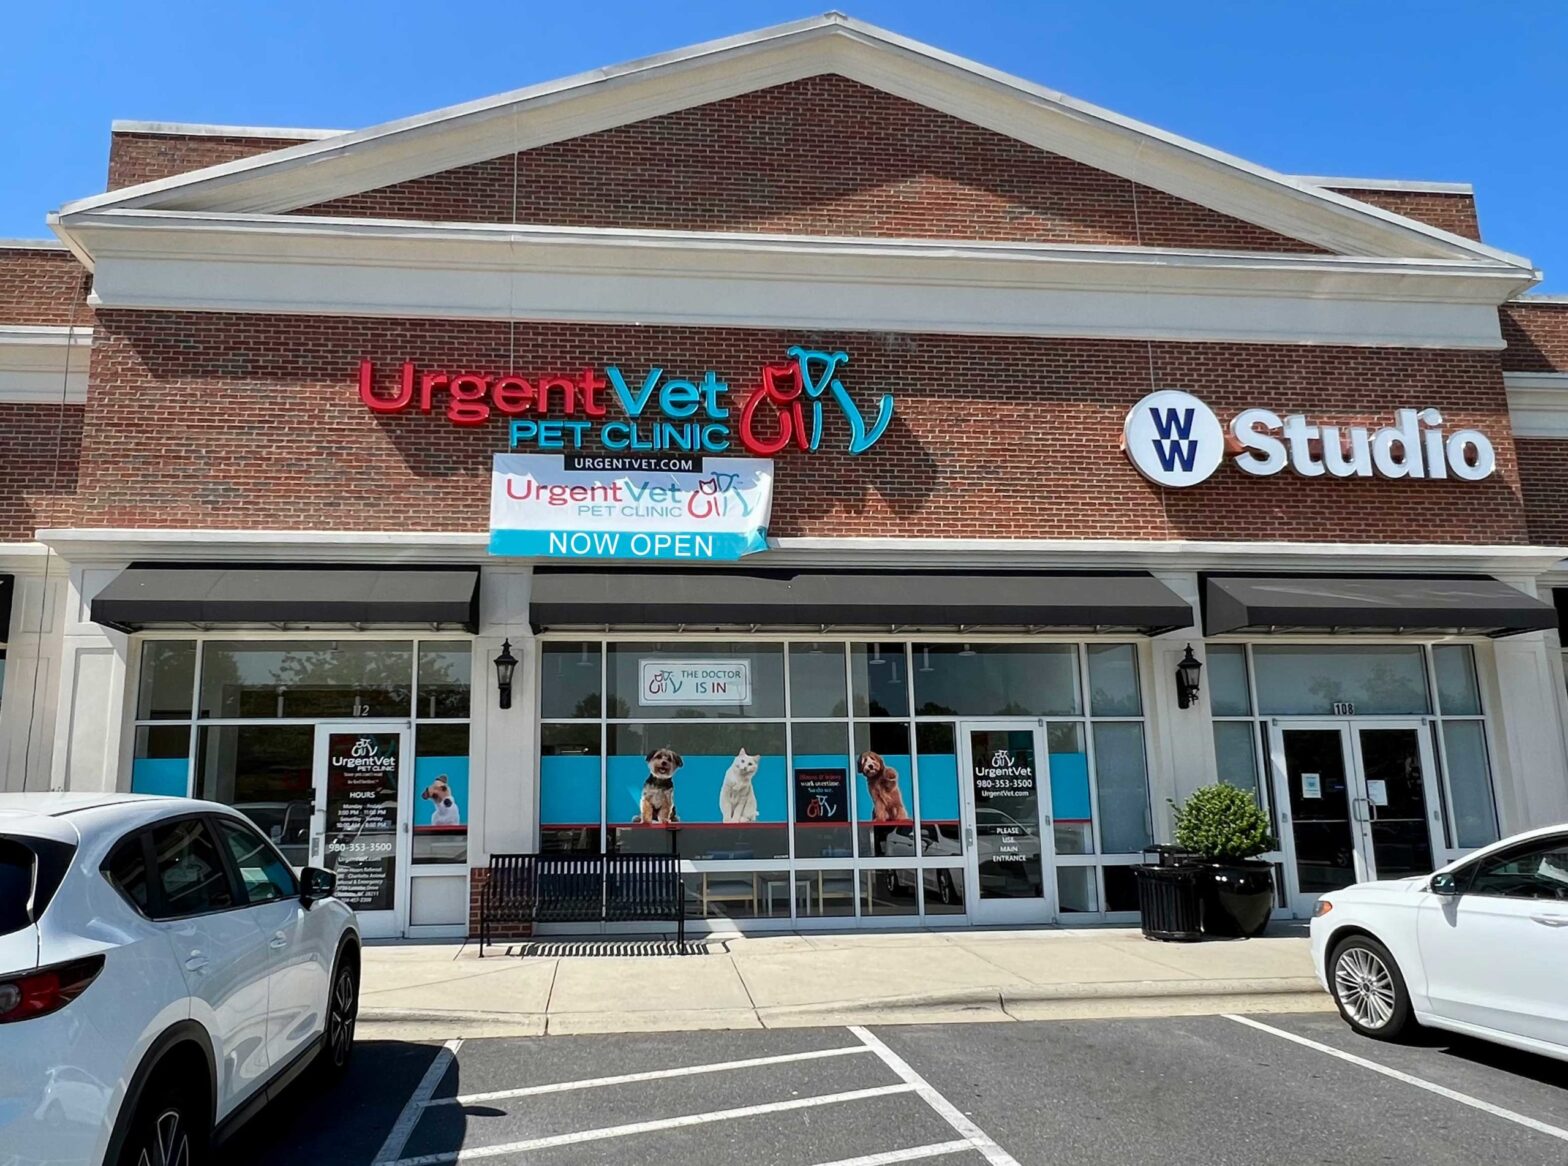 Featured image for post: UrgentVet Expands Its Urgent Care For Pets Concept to Ballantyne